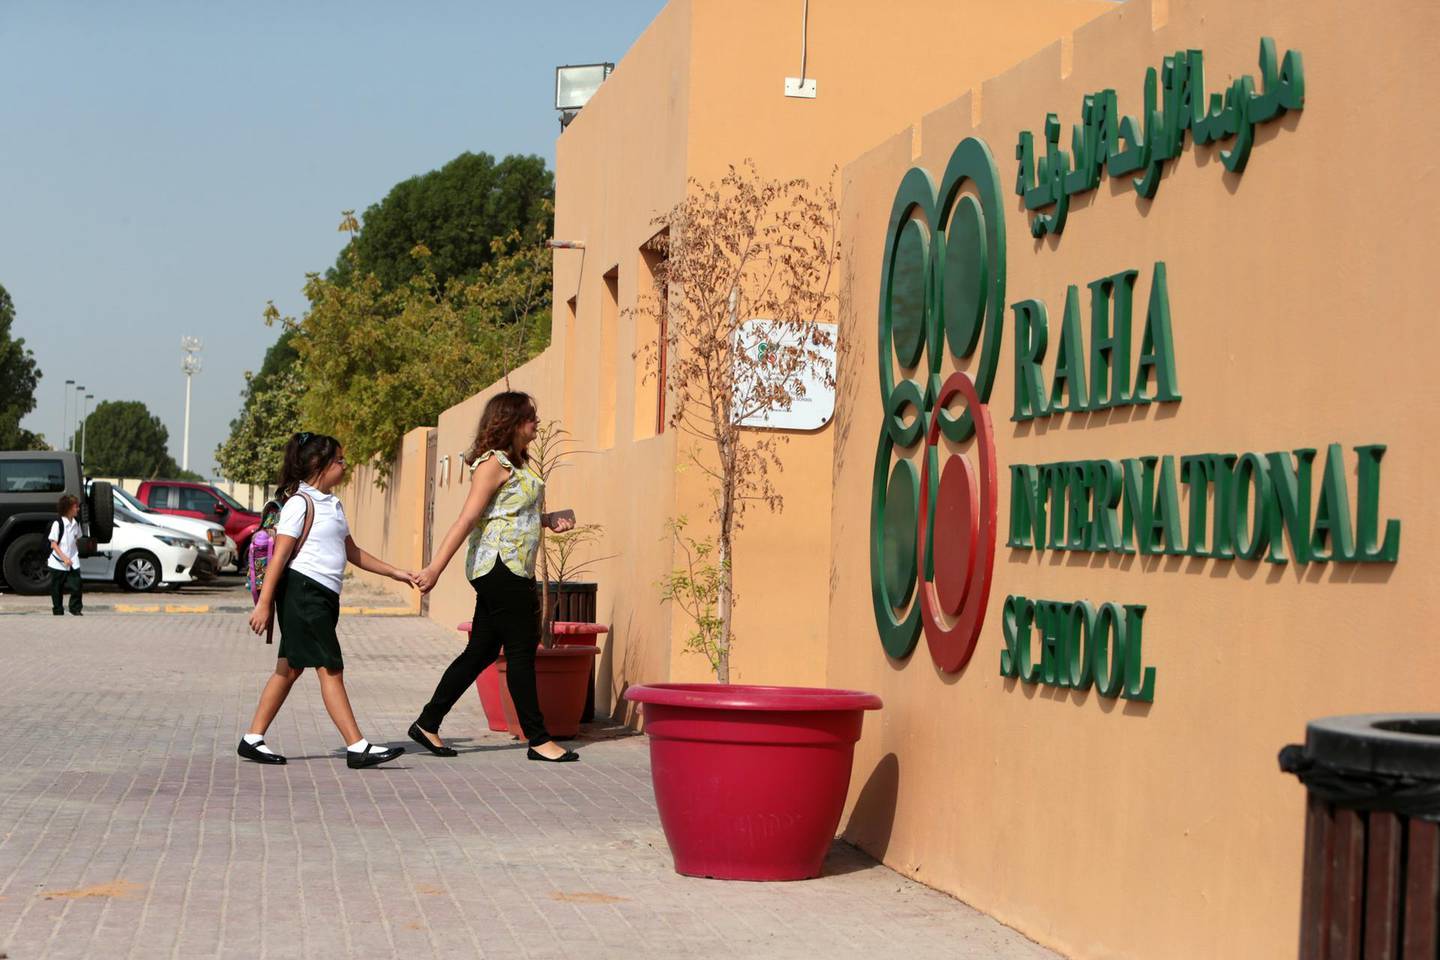 Abu Dhabi, United Arab Emirates, August 30, 2015:    Students arrive for the first day of classes at Raha International School in the Khalifa City area of Abu Dhabi on August 30, 2015. Christopher Pike / The National

Reporter: Roberta Pennington
Section: News
Keywords: 

 *** Local Caption ***  CP0830-na-school 1st day-AD04.JPG